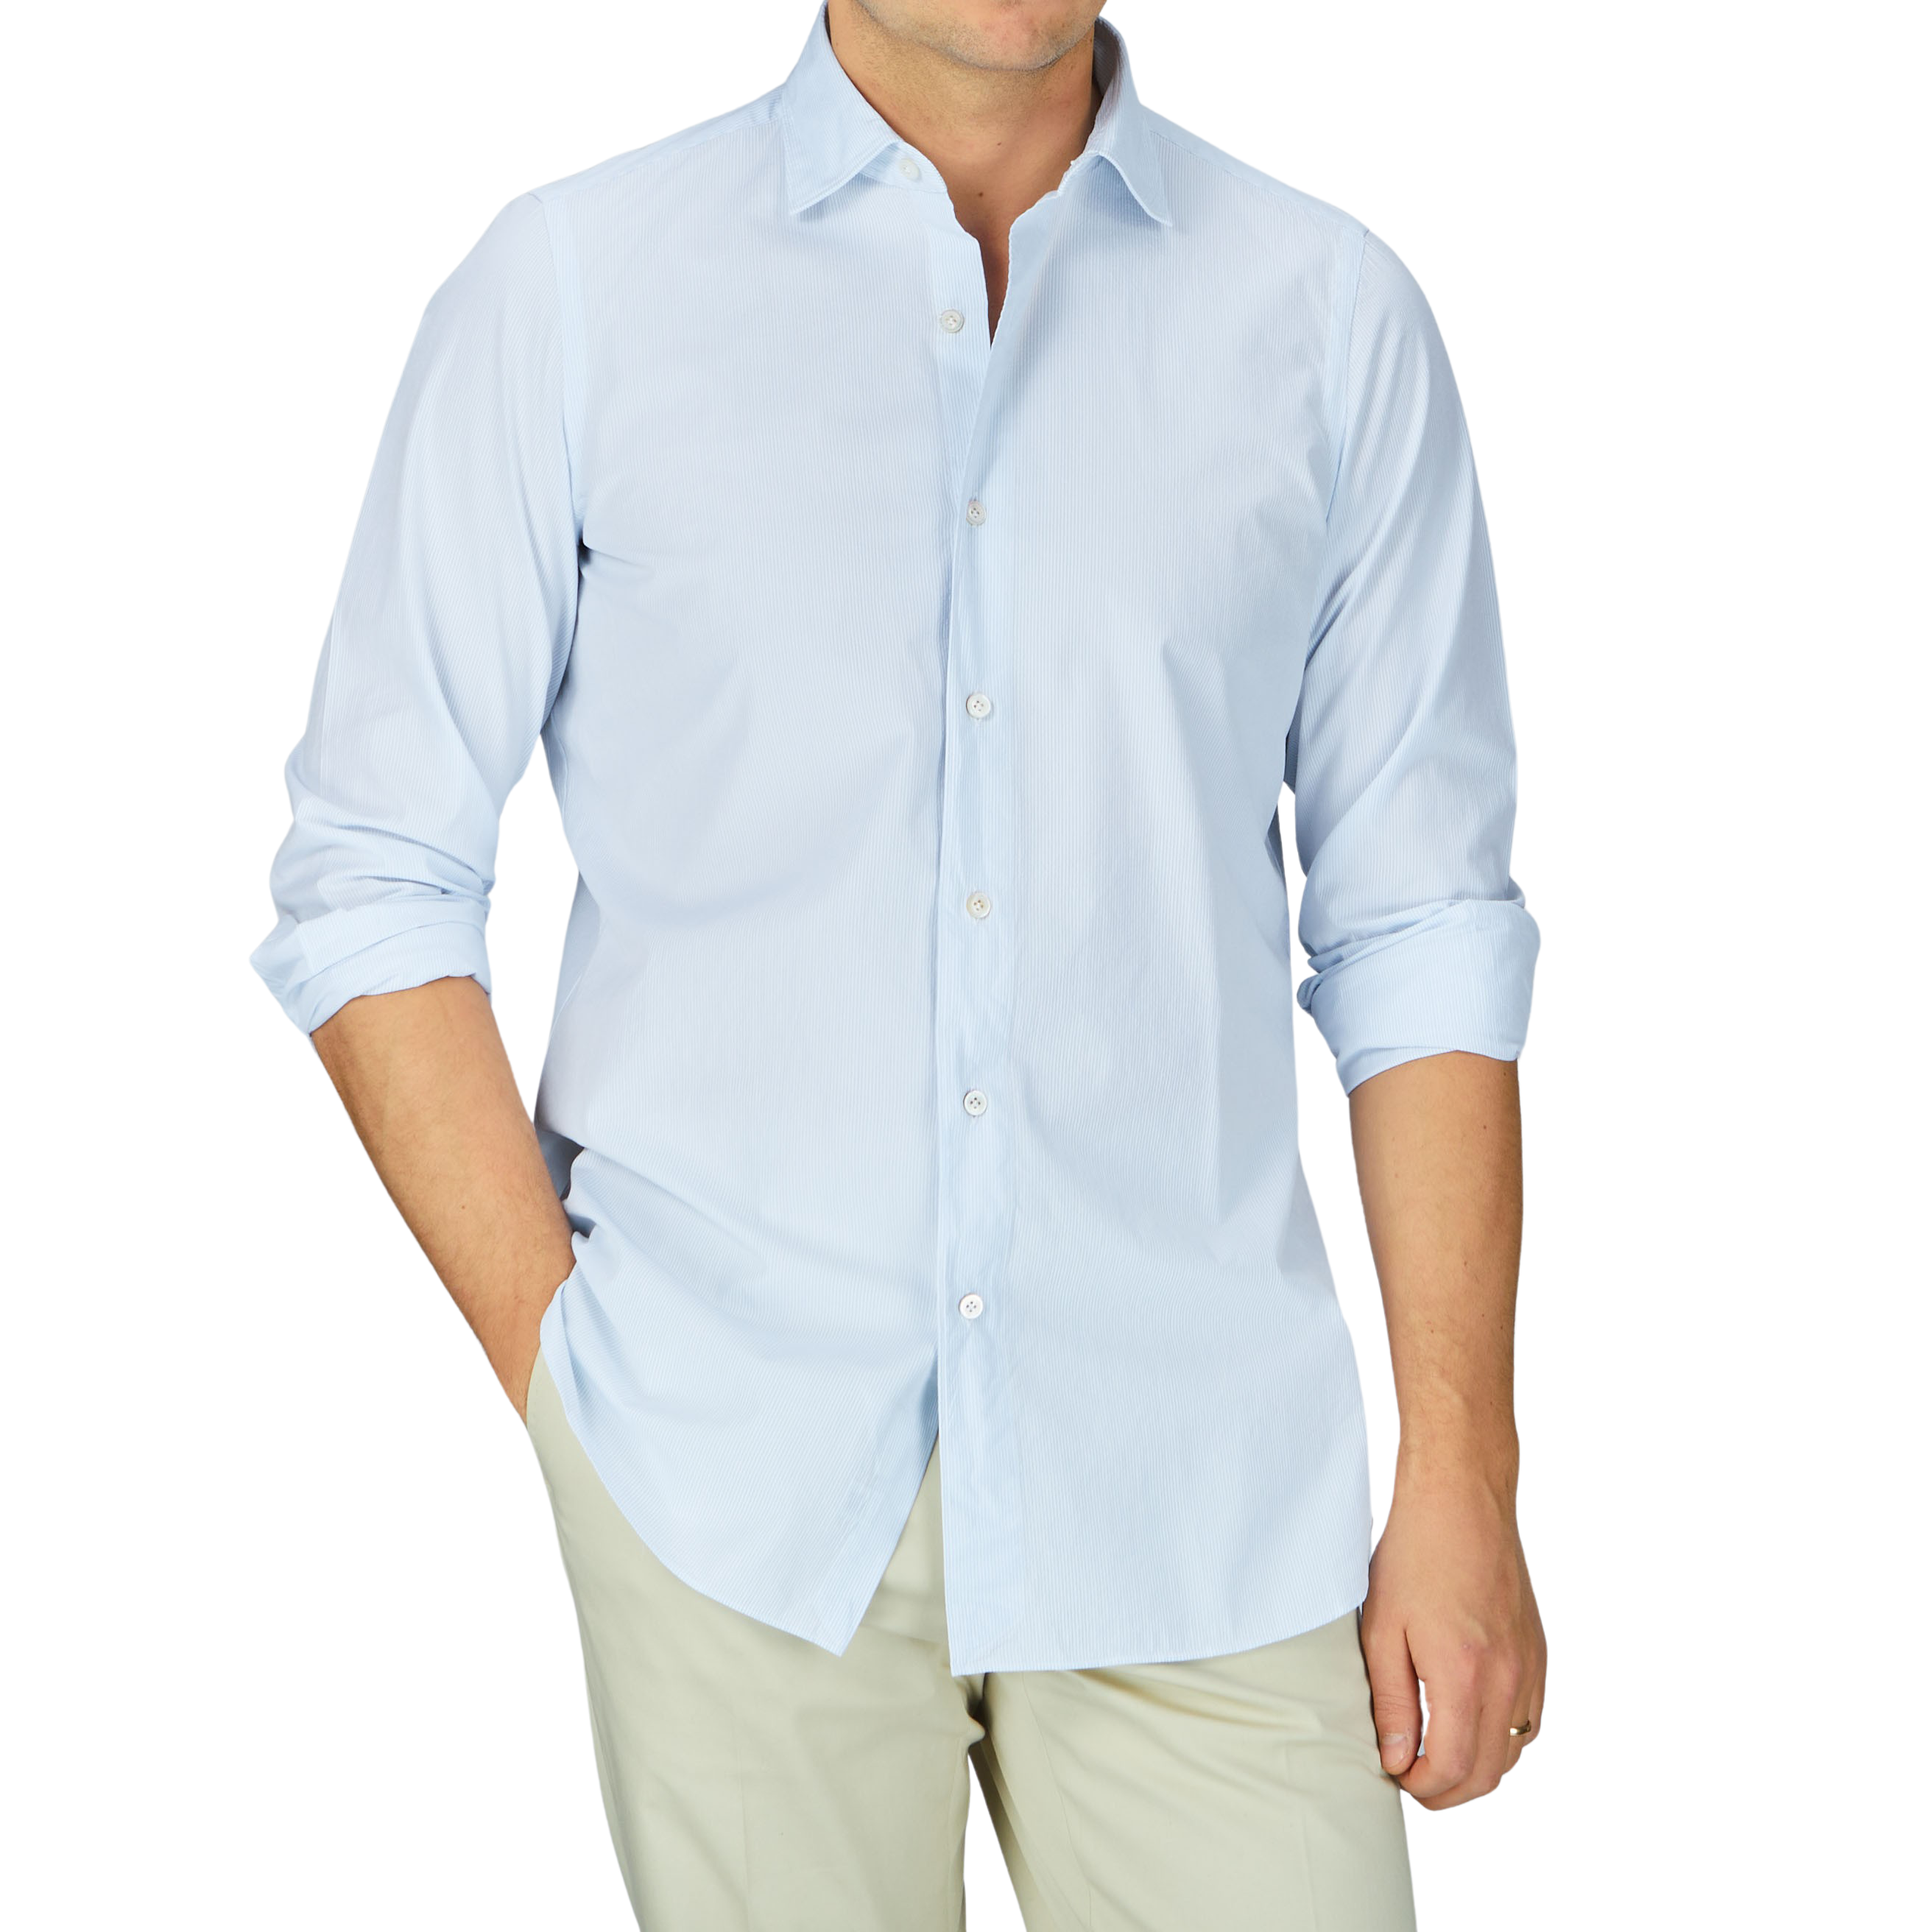 A man dressed in a Sky Blue Striped Cotton Seersucker Shirt and khaki pants by Finamore.